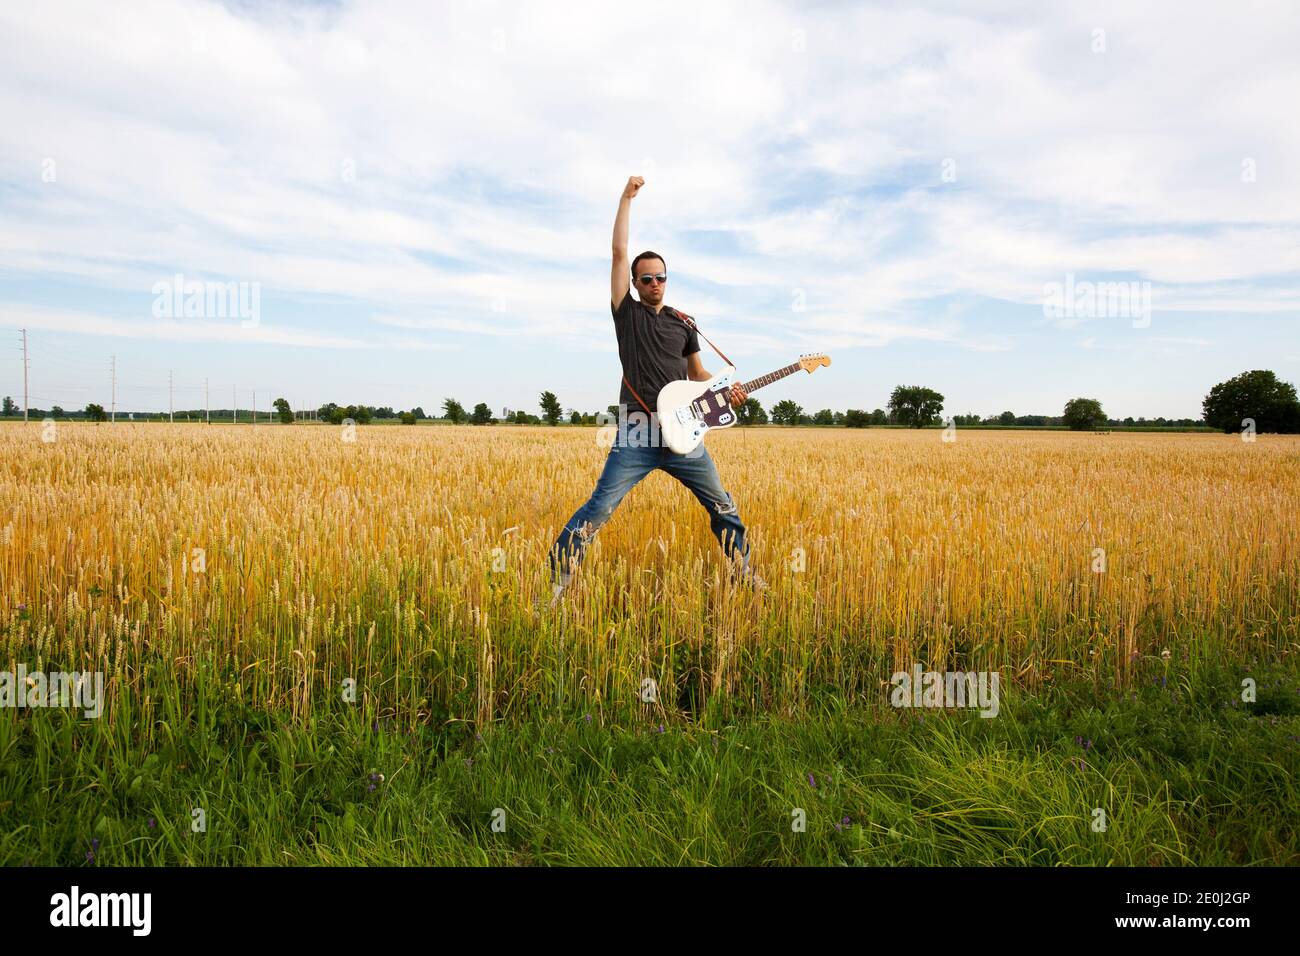 Guy Playing Electric Guitar In Wheat Field Stock Photo